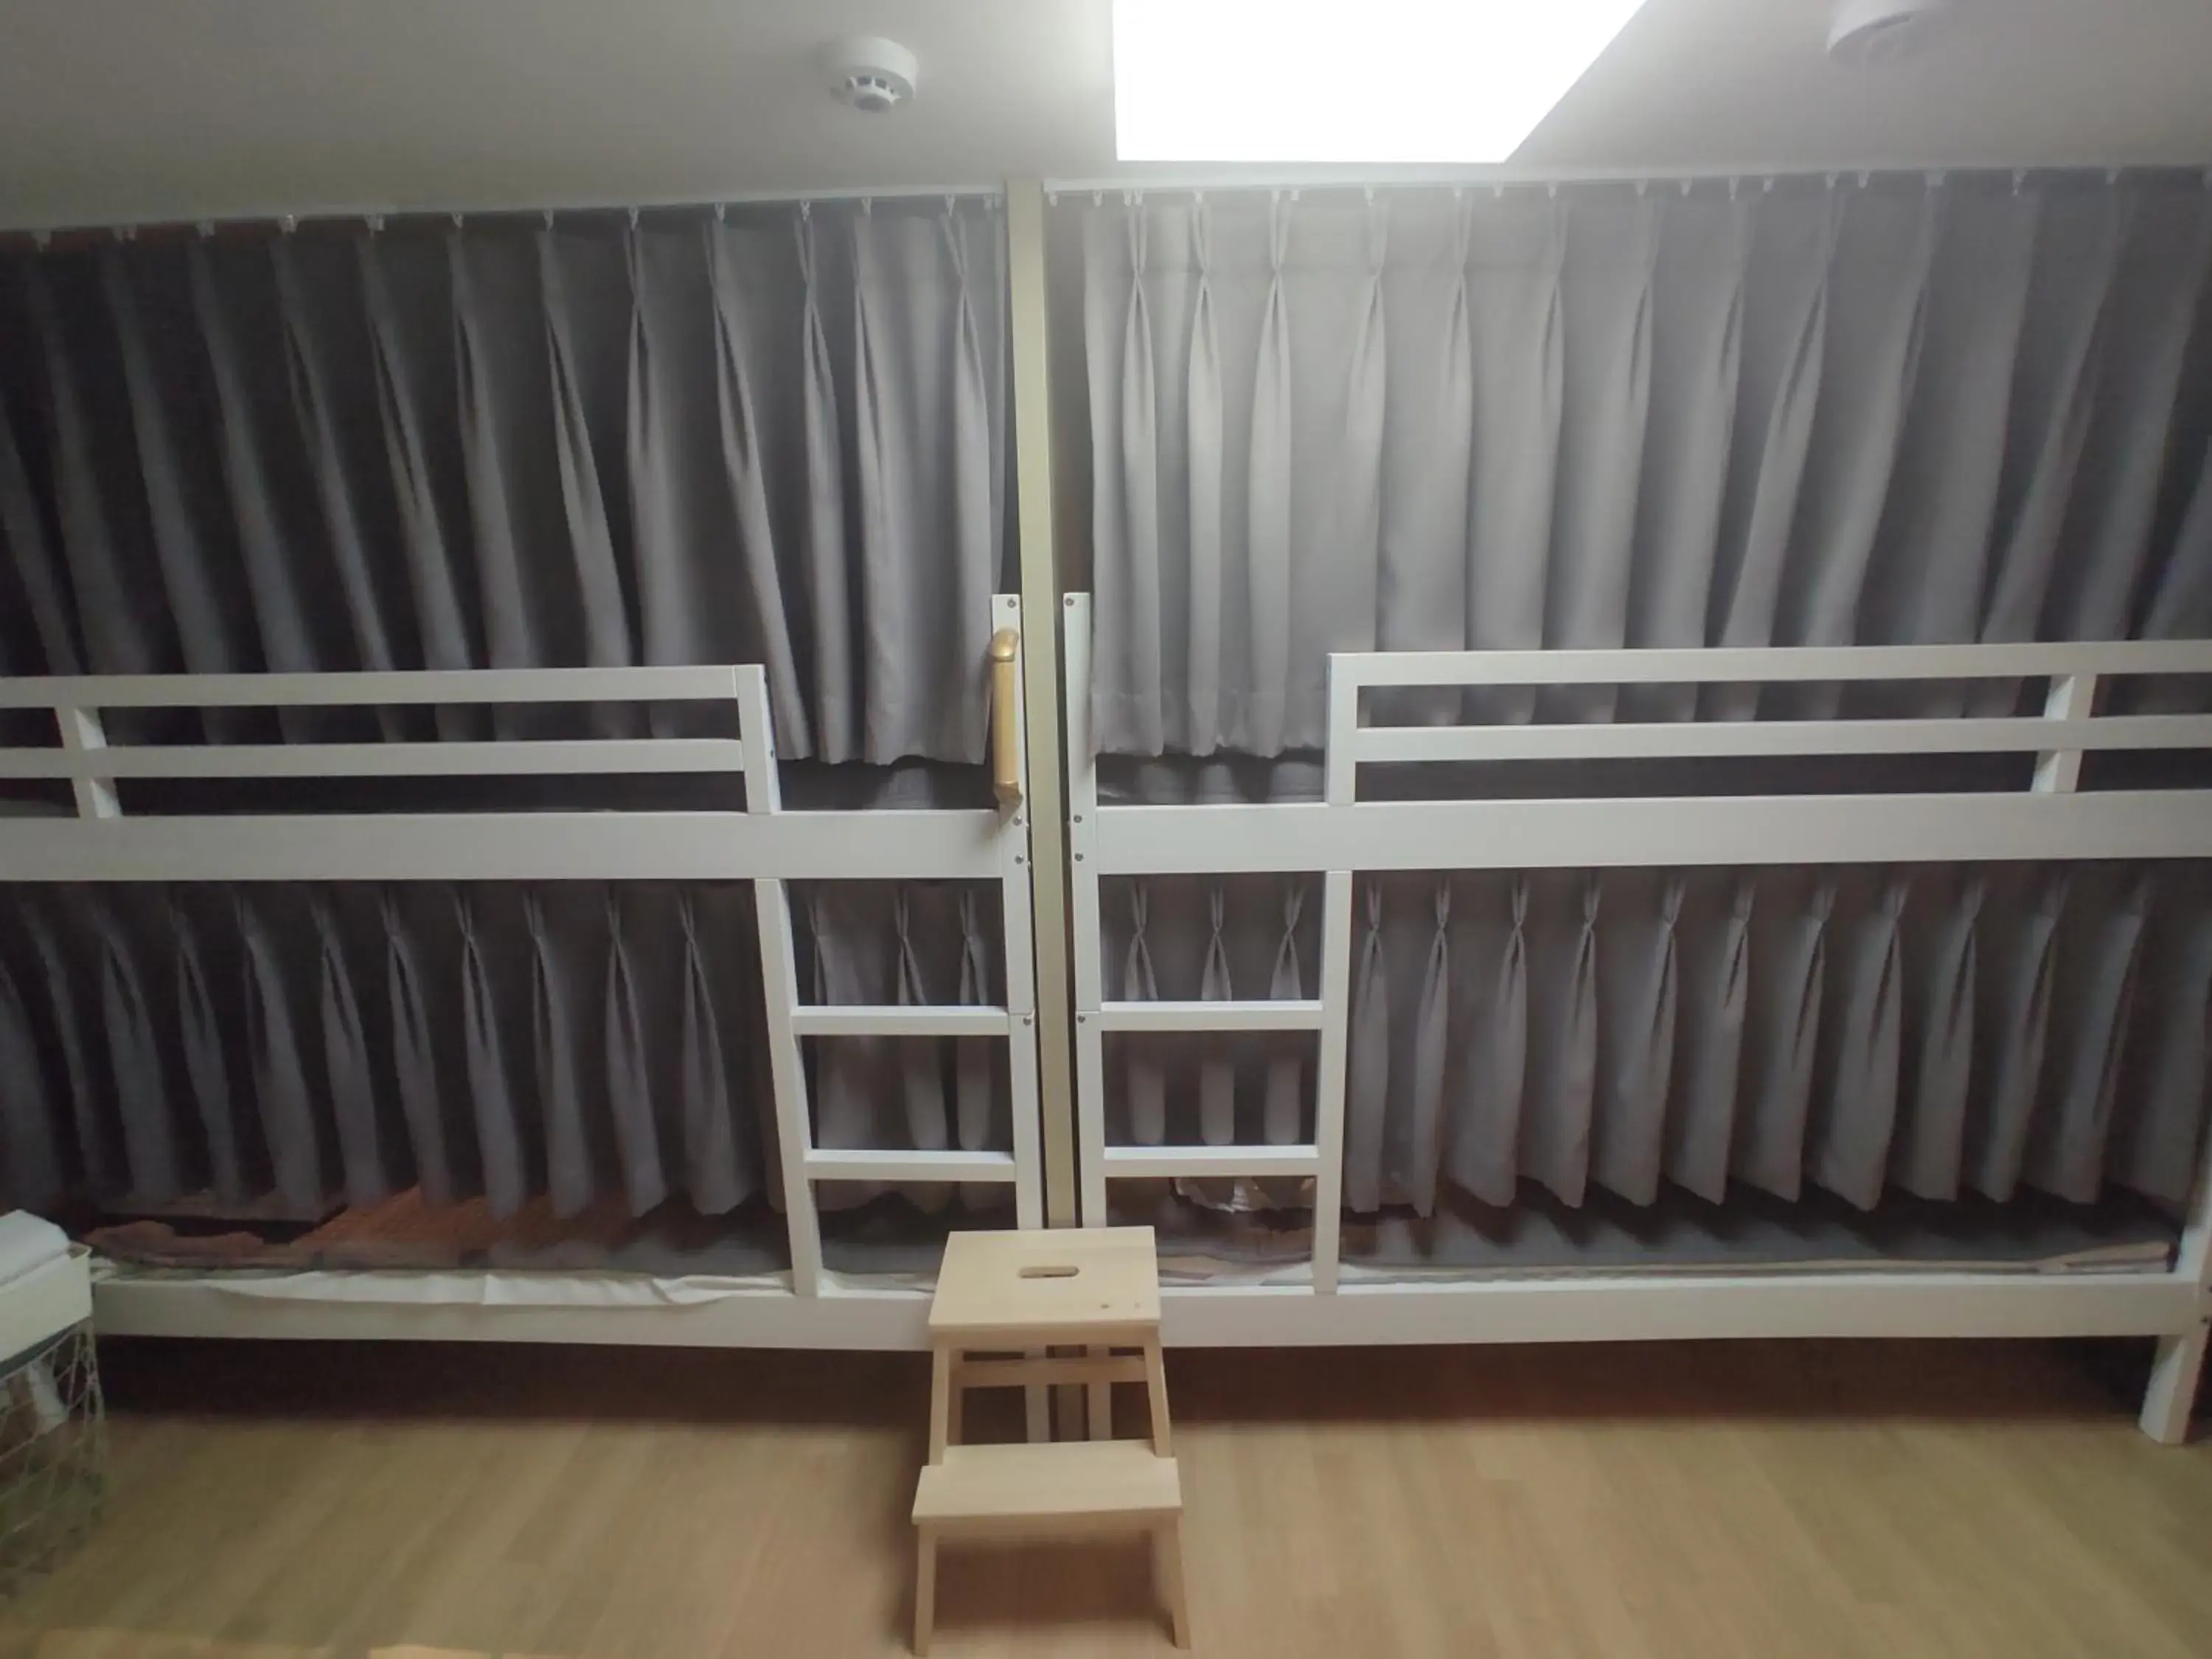 Bunk Bed in Y's house